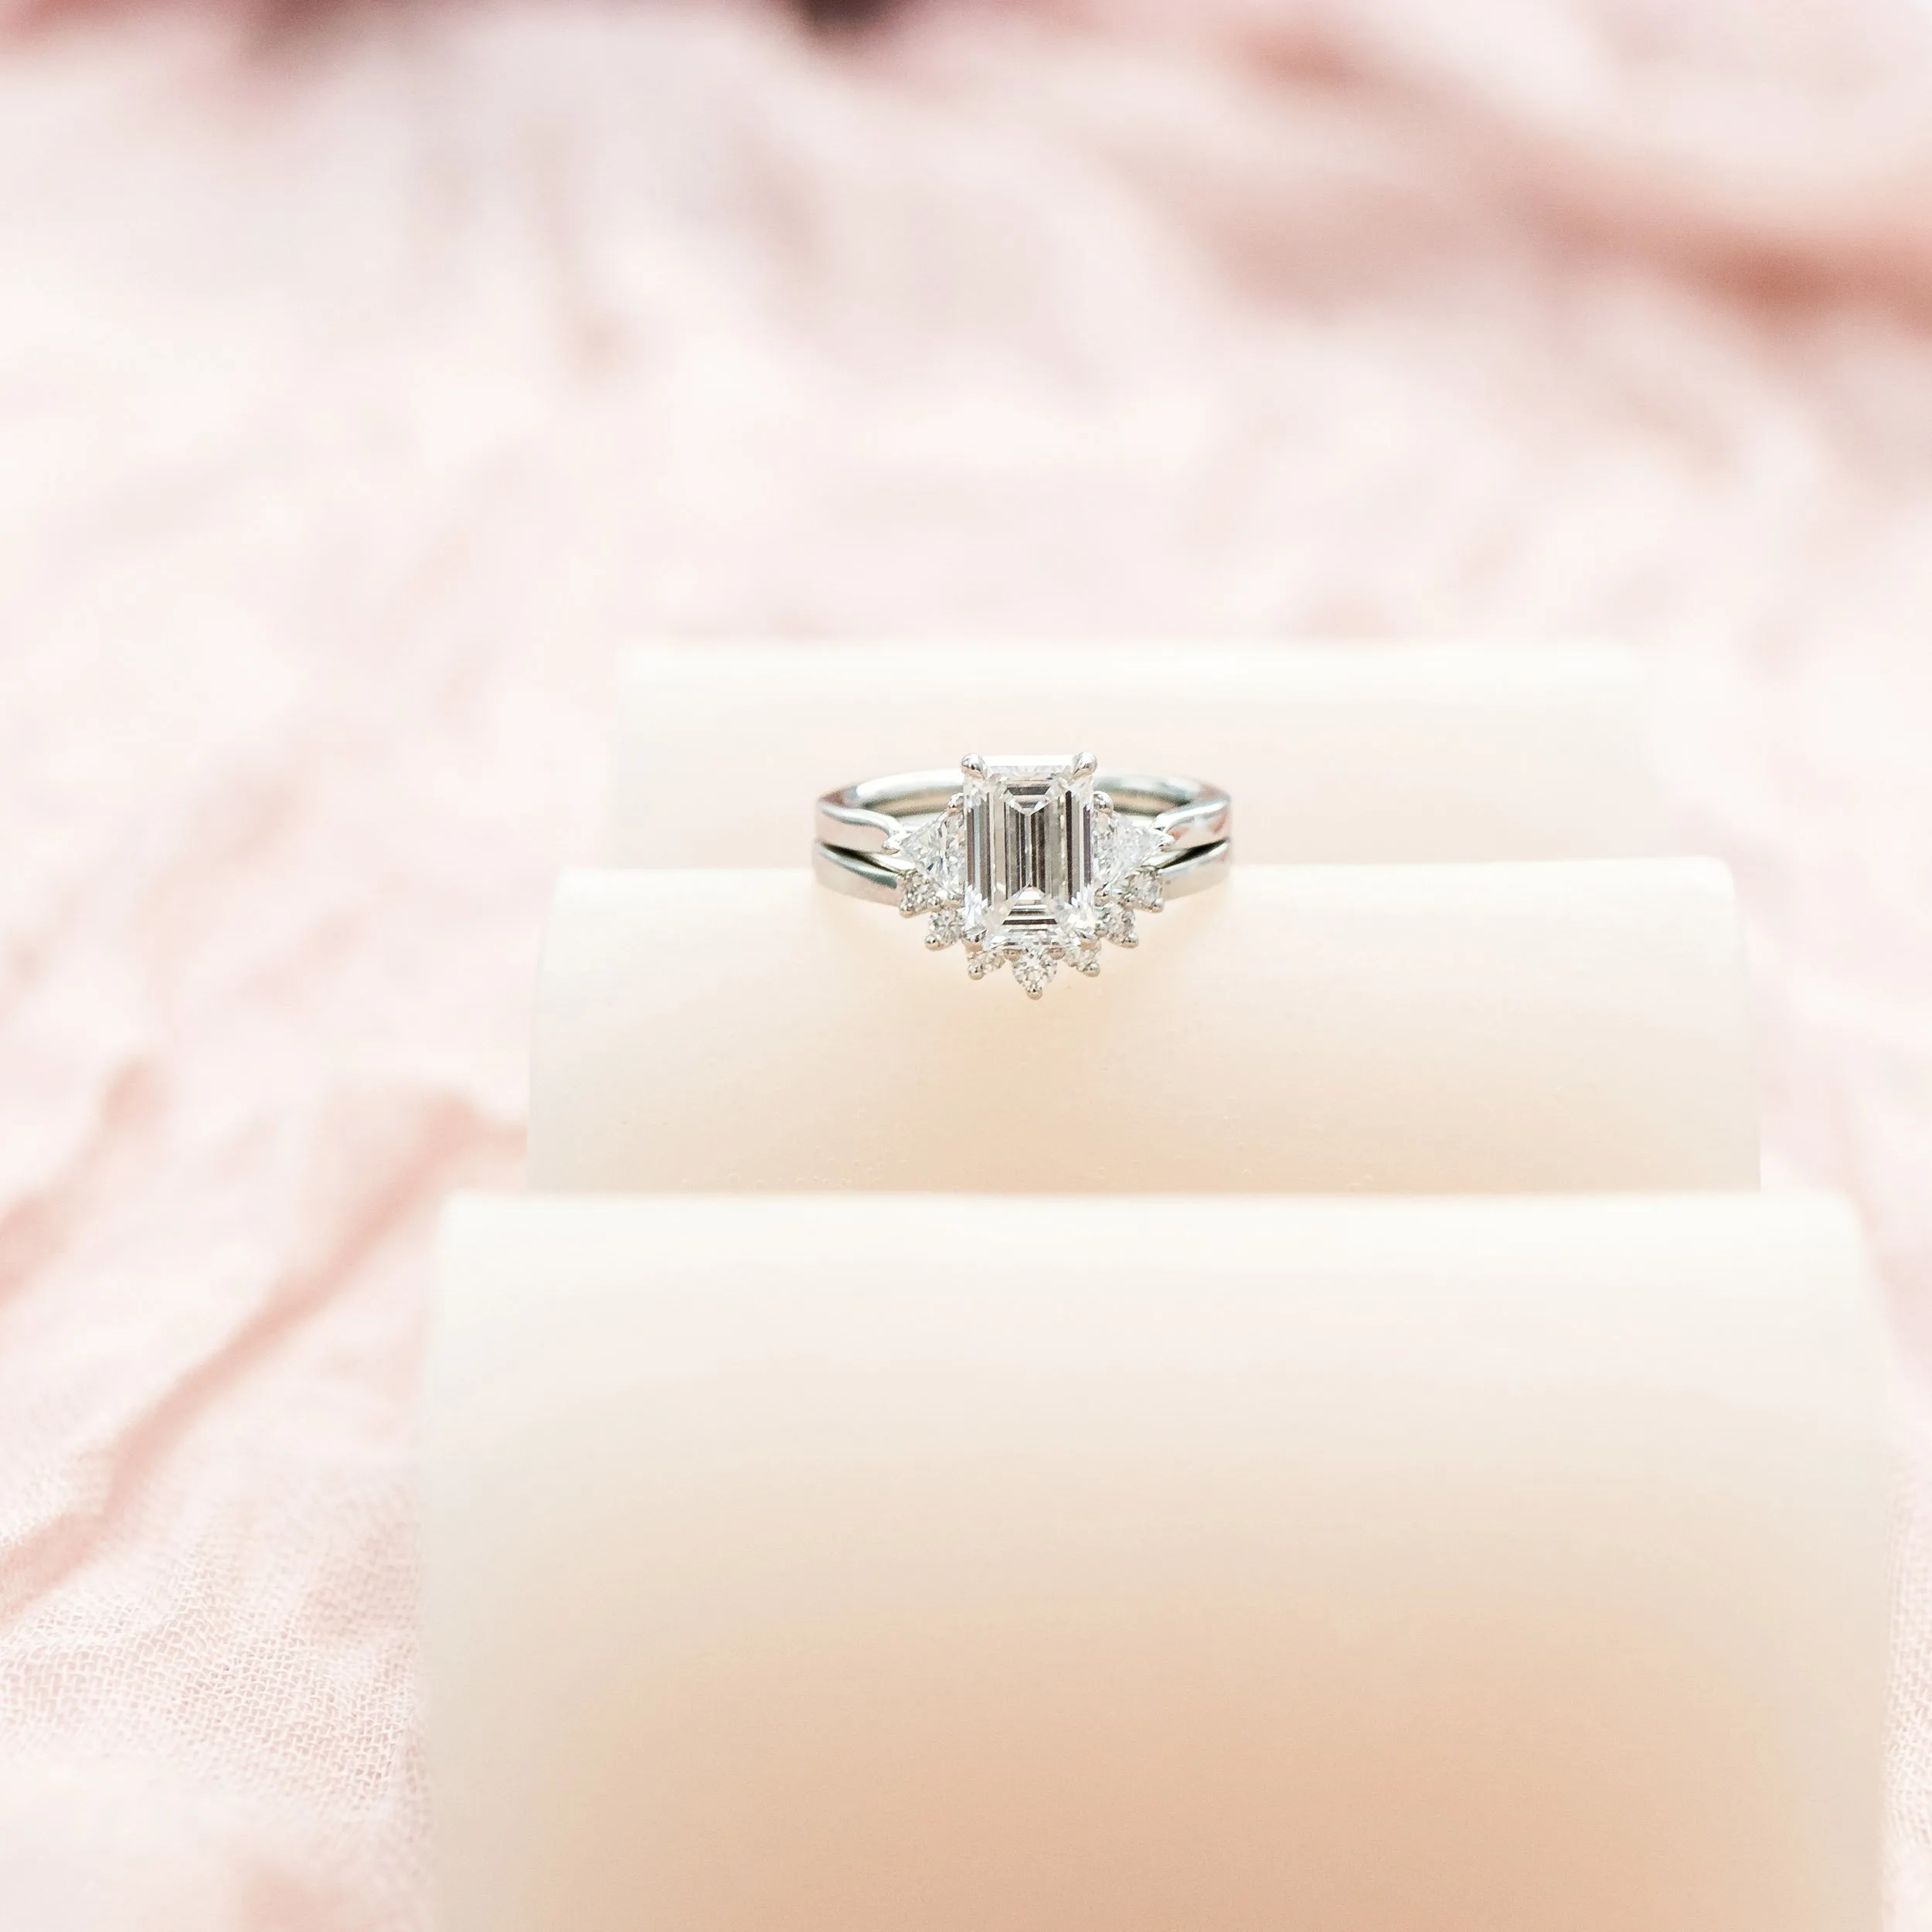 platinum 3 stone engagement ring with 2.25ct emerald cut center stone and trillion side stones with nesting wedding band ada diamonds design ad 466 and ad 258